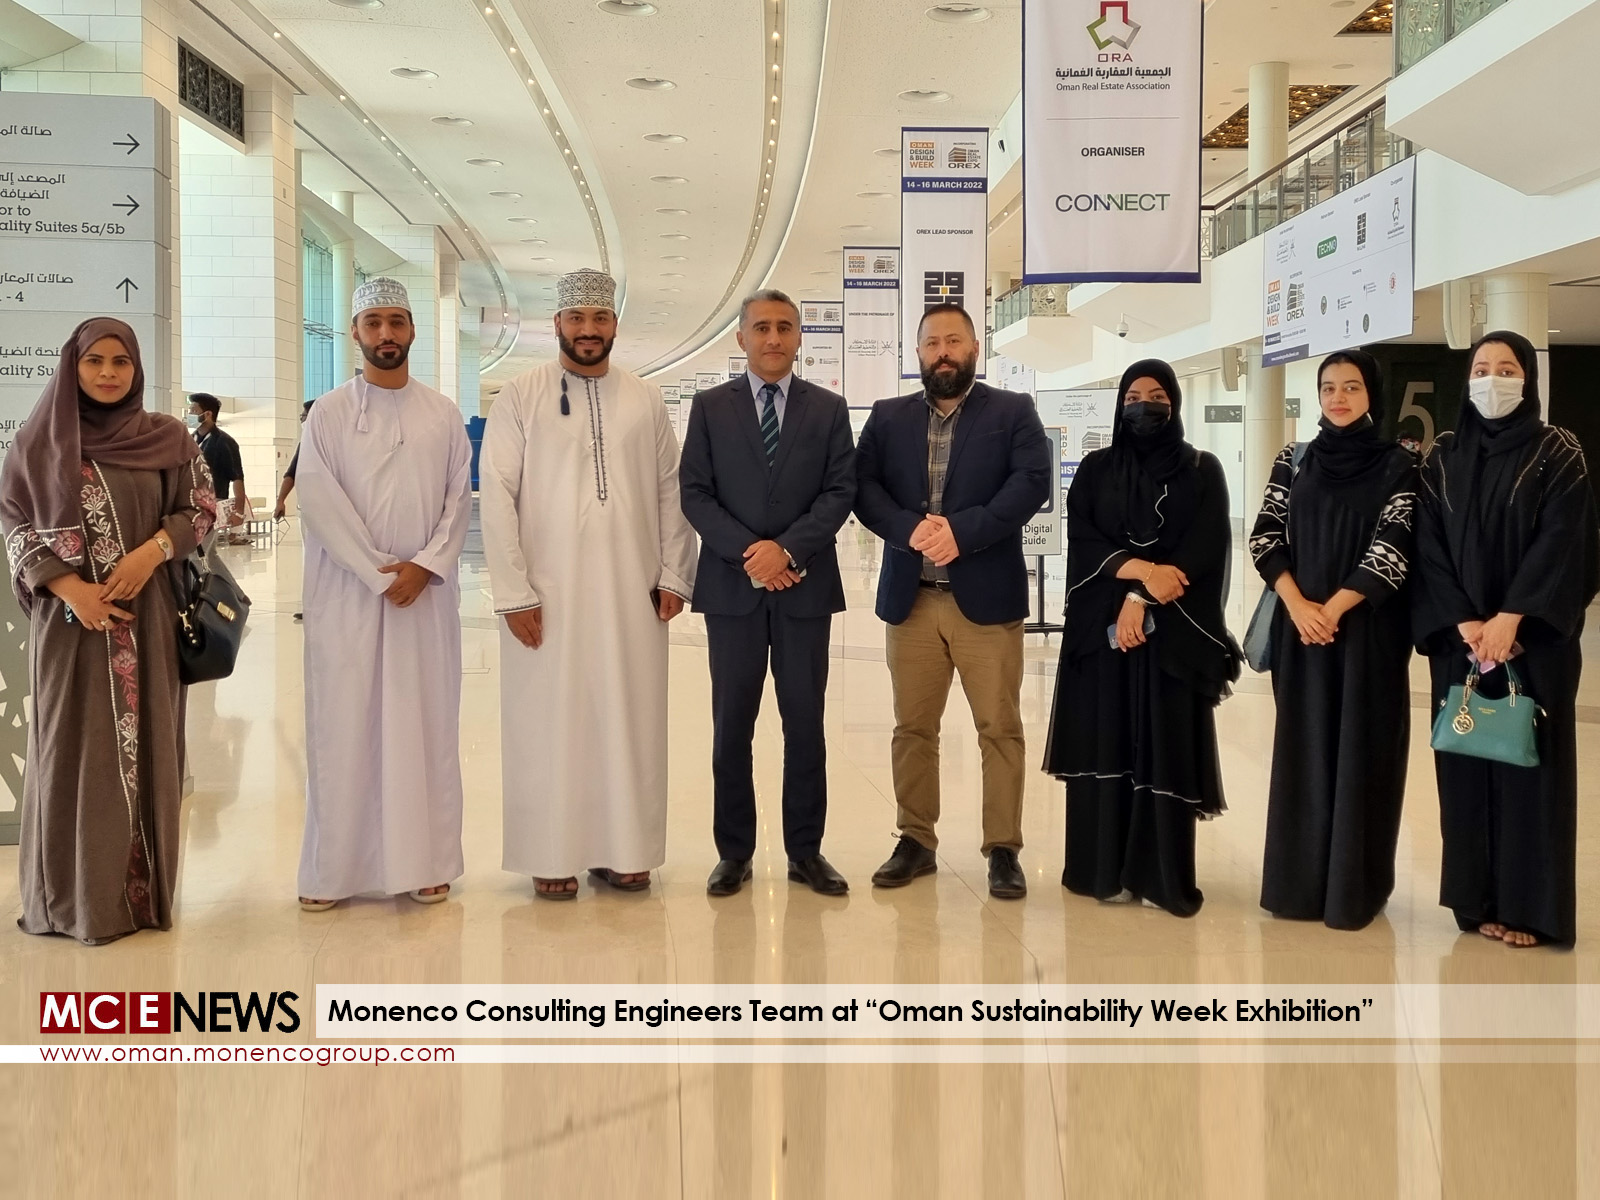 Monenco Consulting Engineers Team at “Oman Sustainability Week Exhibition”